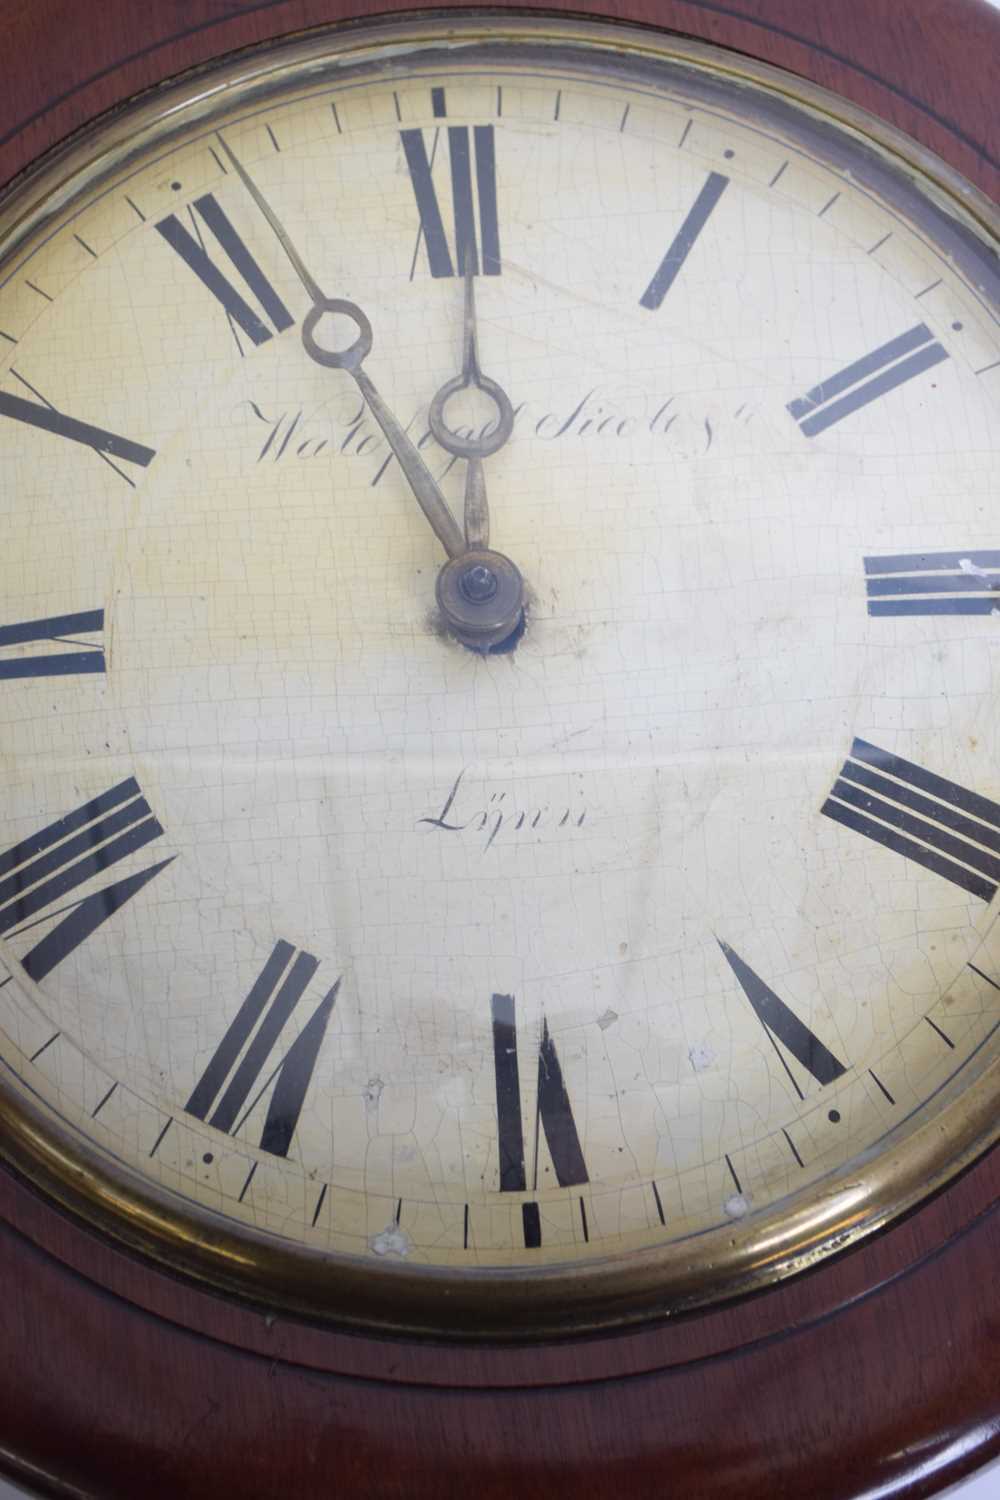 Waldfogel Lynn, 19th century postman's alarm type wall clock with circular face and later bracket - Image 2 of 2